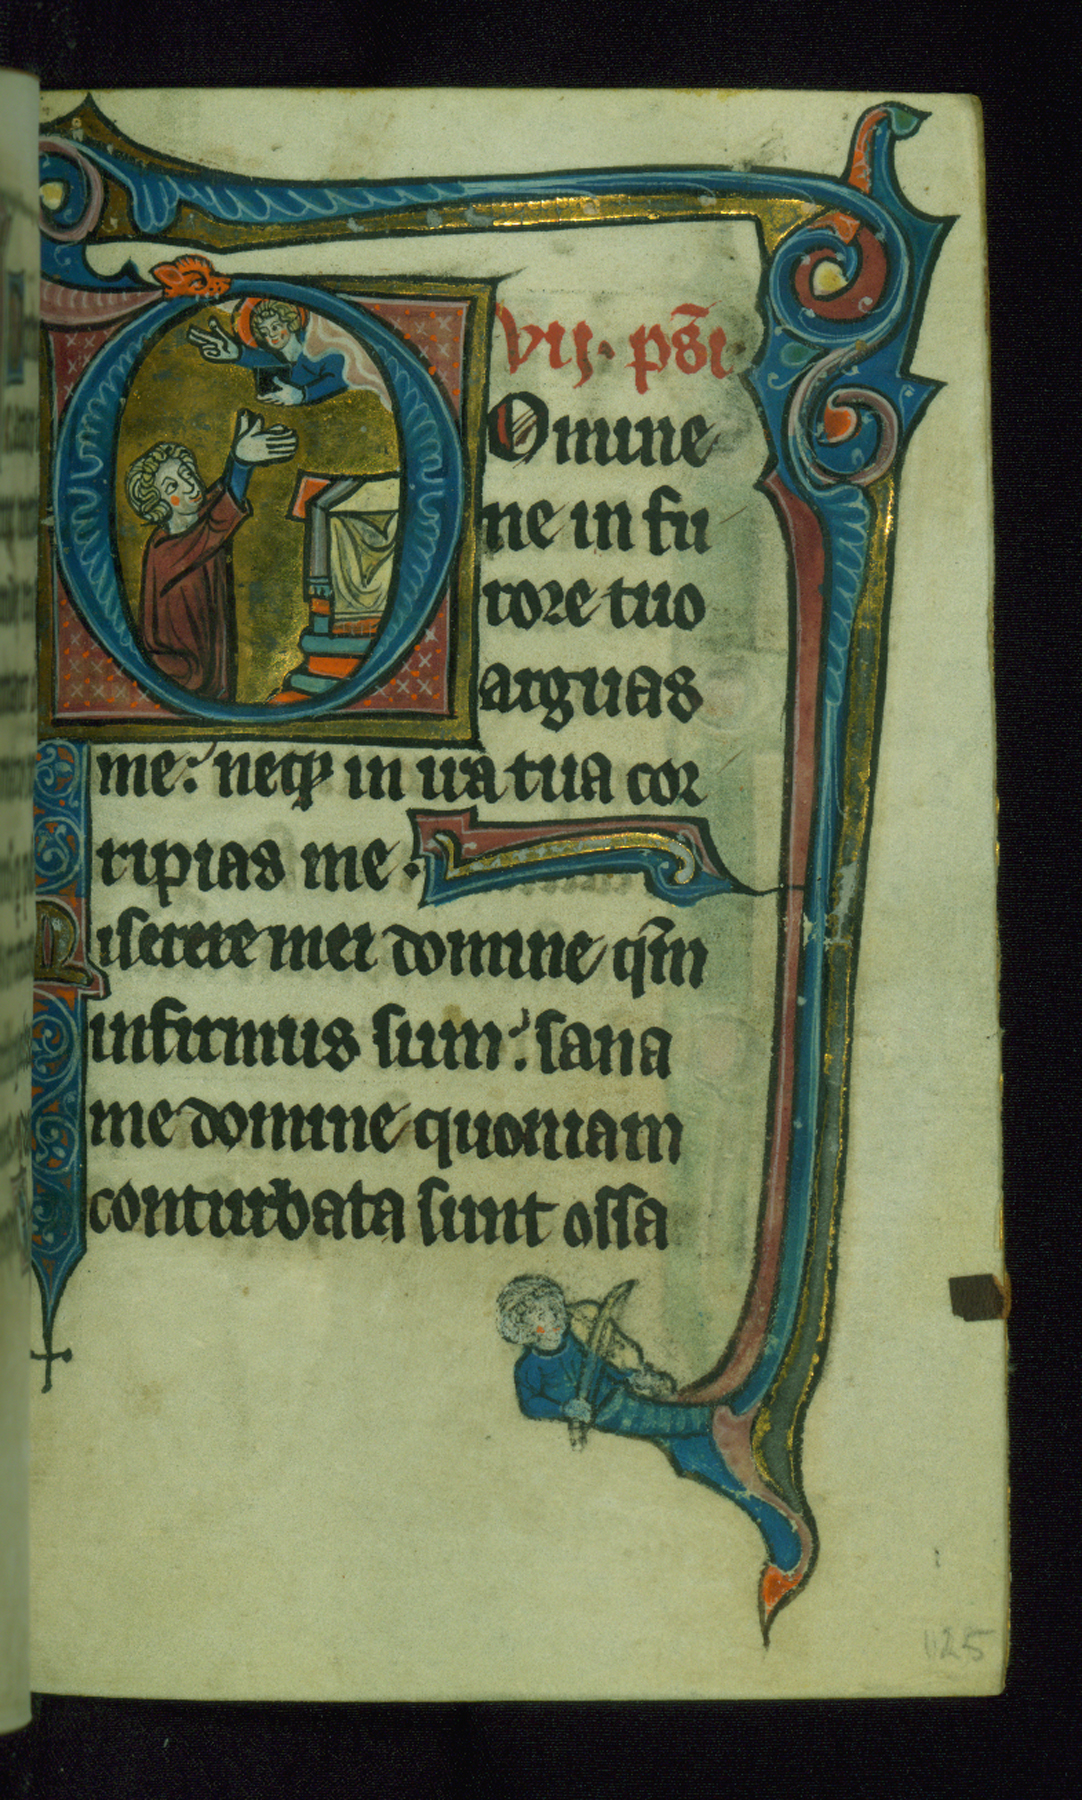 Image for Leaf from Book of Hours: Seven Penitential Psalms, Initial "D" Showing a Man Kneeling Before an Altar Praying, with God Descending from a Cloud and Marginal Drollery of a Man Playing a Vielle